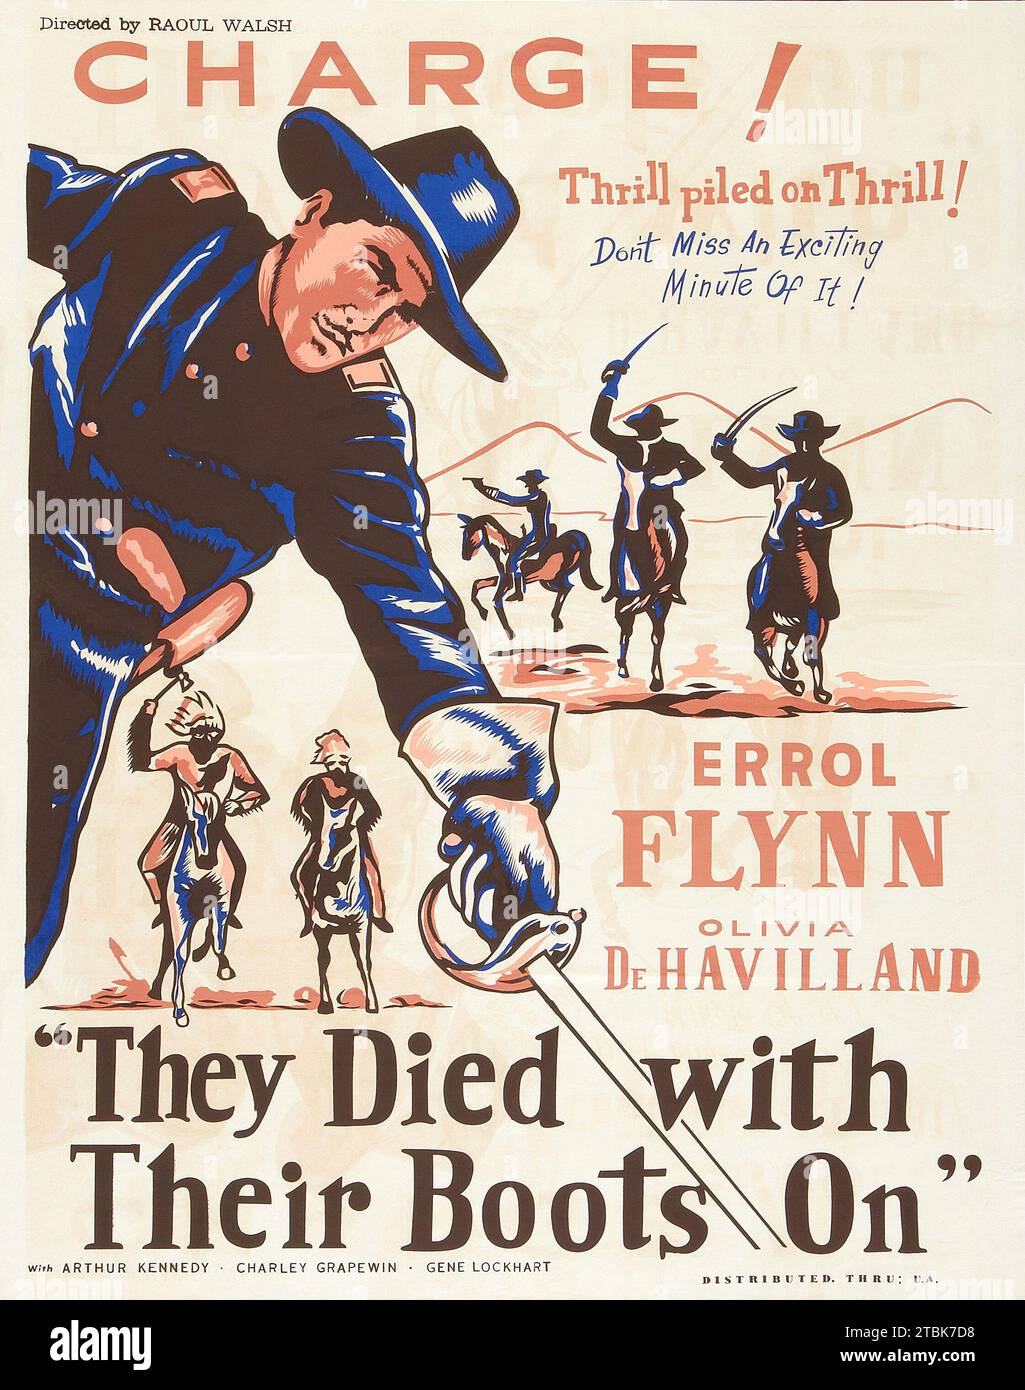 "The art from the 1960 rerelease poster to the film ""They Died with Their Boots On"" starring Errol Flynn and Olivia DeHavilland." Stock Photo